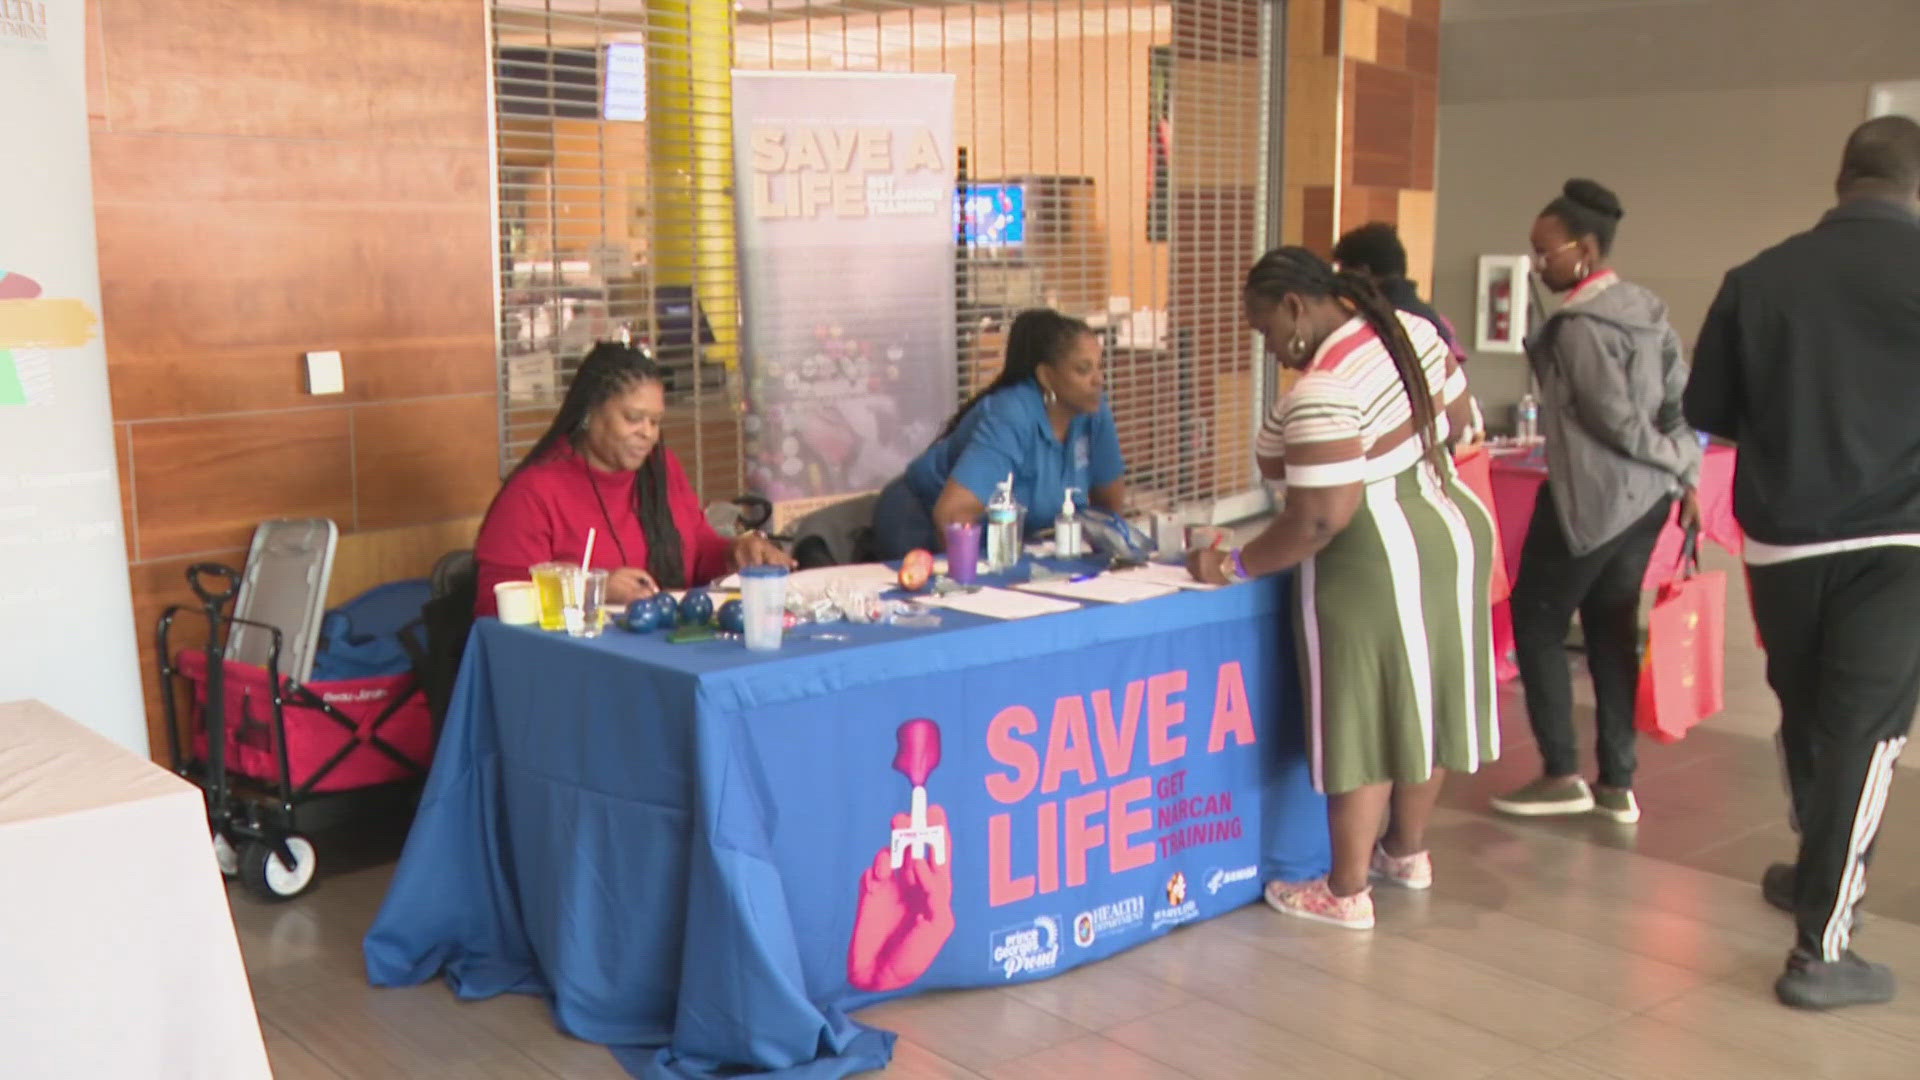 WUSA9 spoke with Dr. Sheryl Neverson, co-organizer of the event, who mentioned how communities could do more to foster safe spaces for young people.